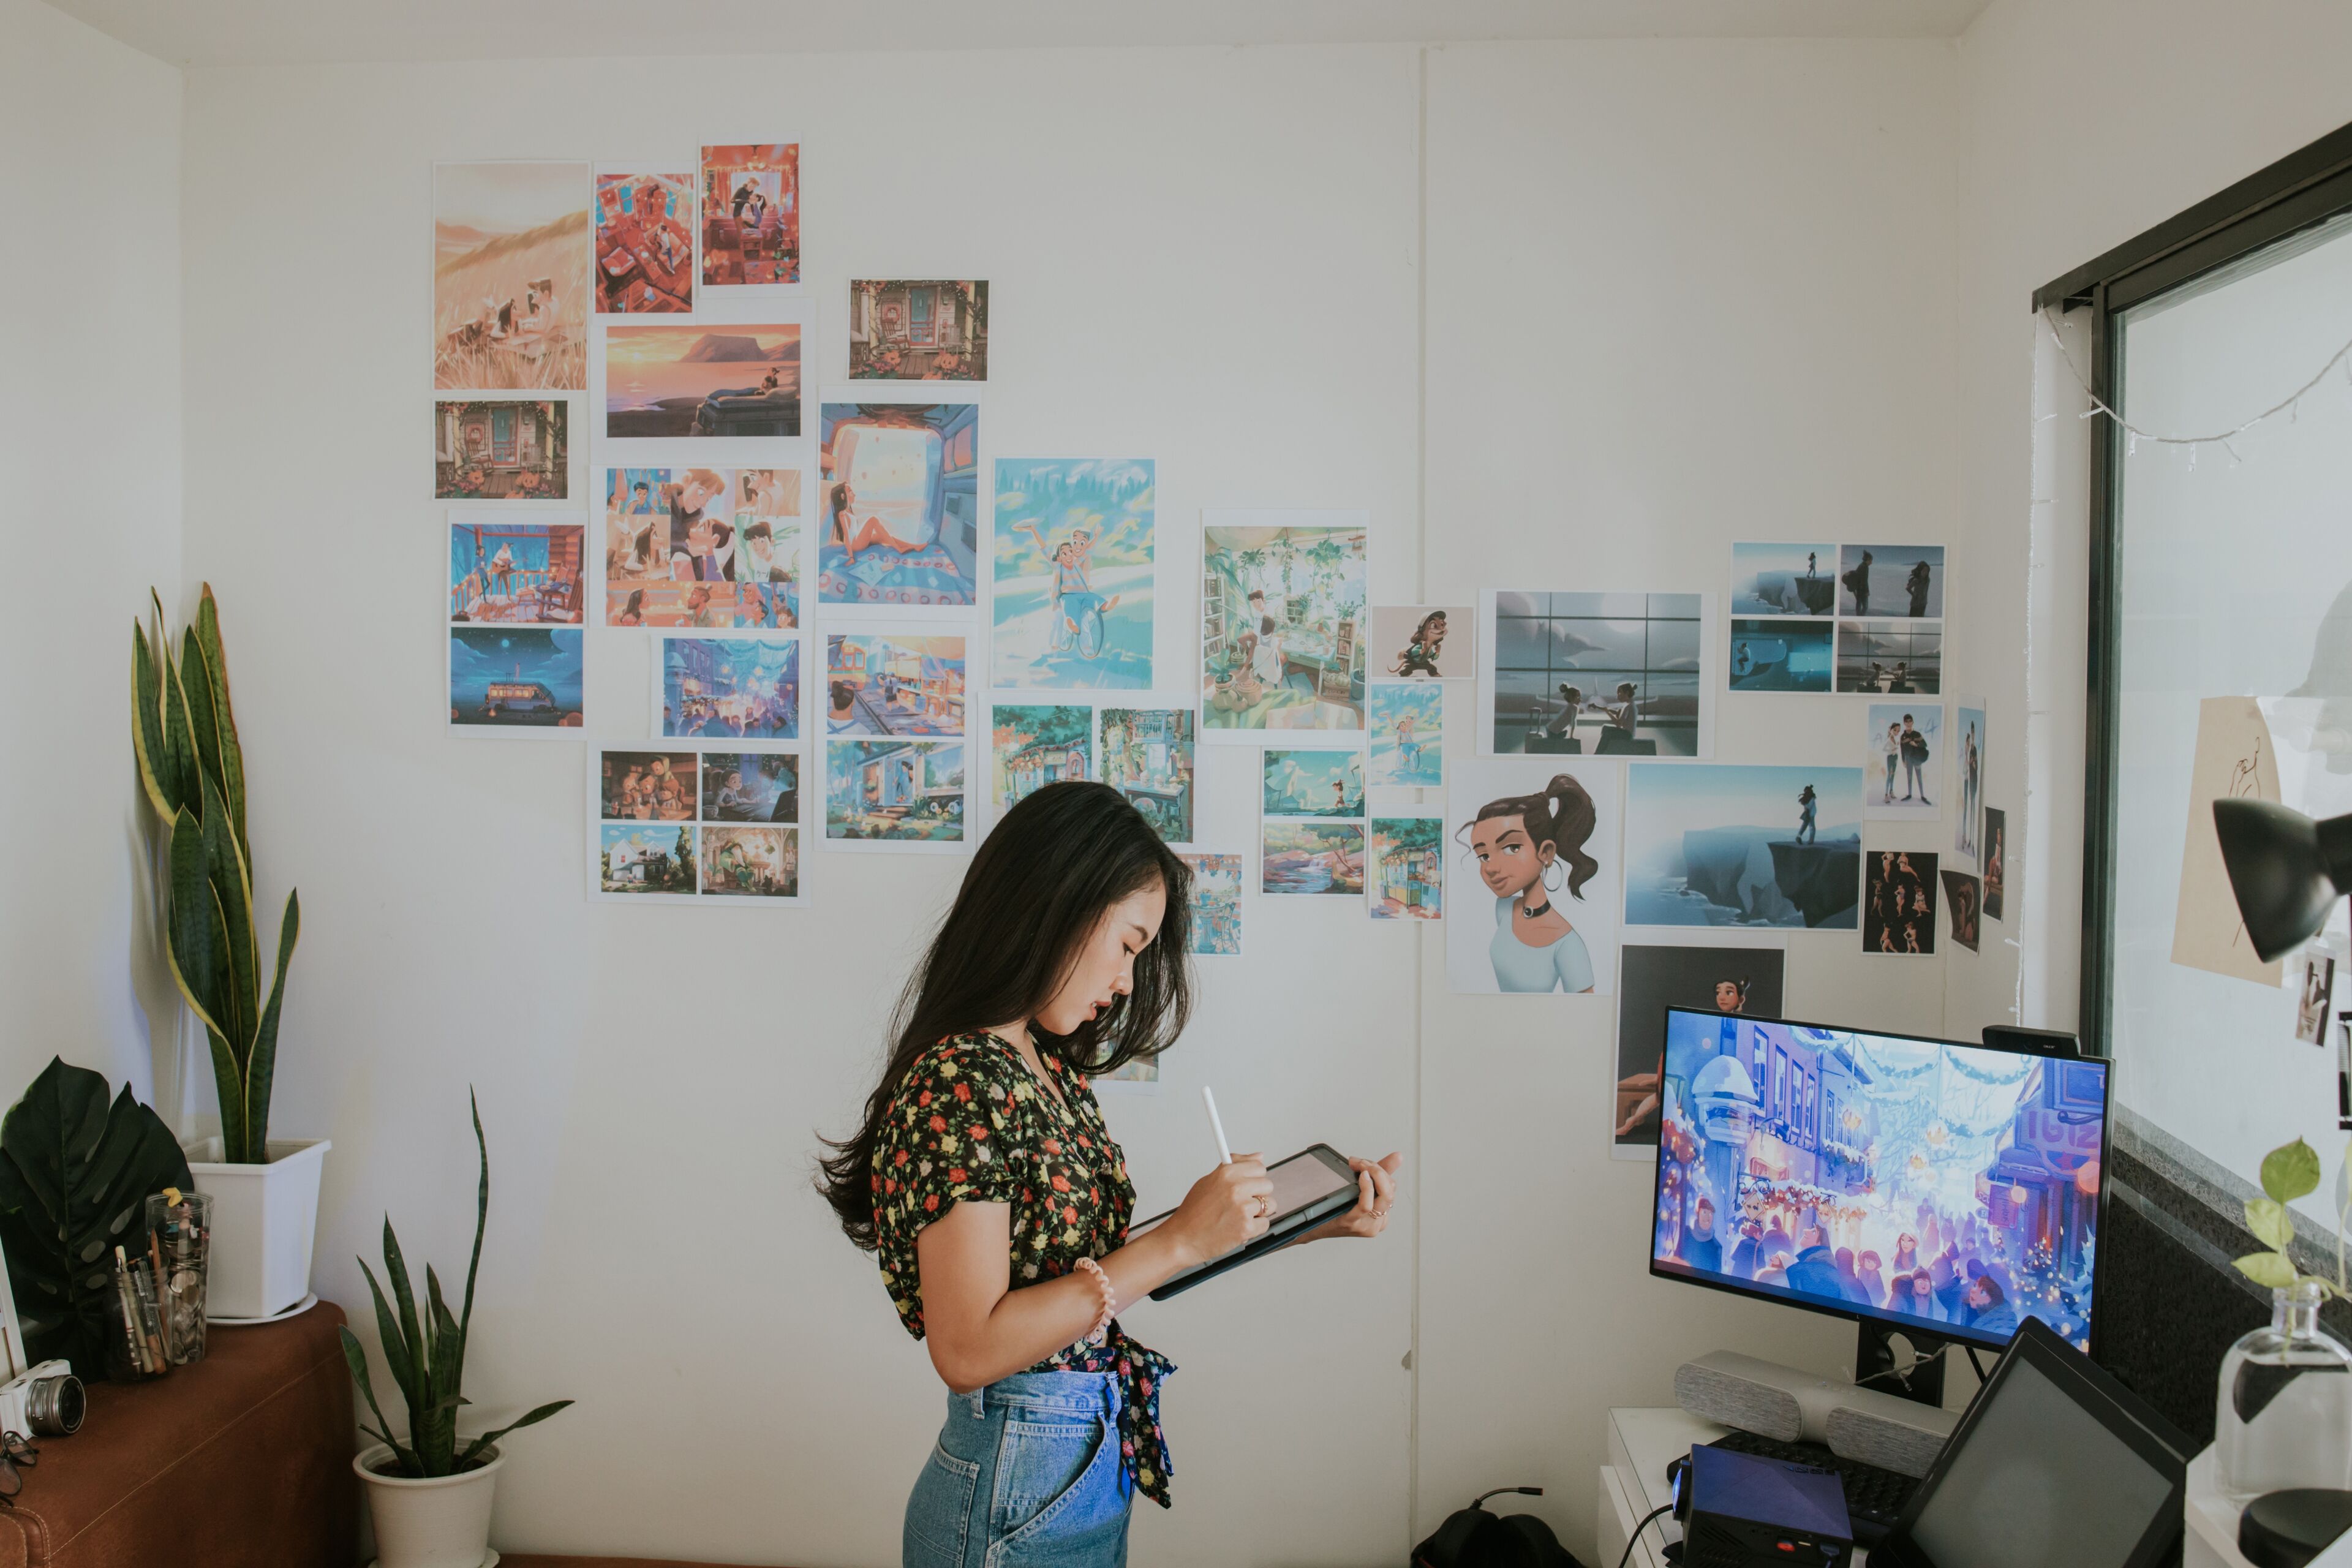 A focused artist sketches on a digital tablet in a creative workspace adorned with colorful animation artwork.